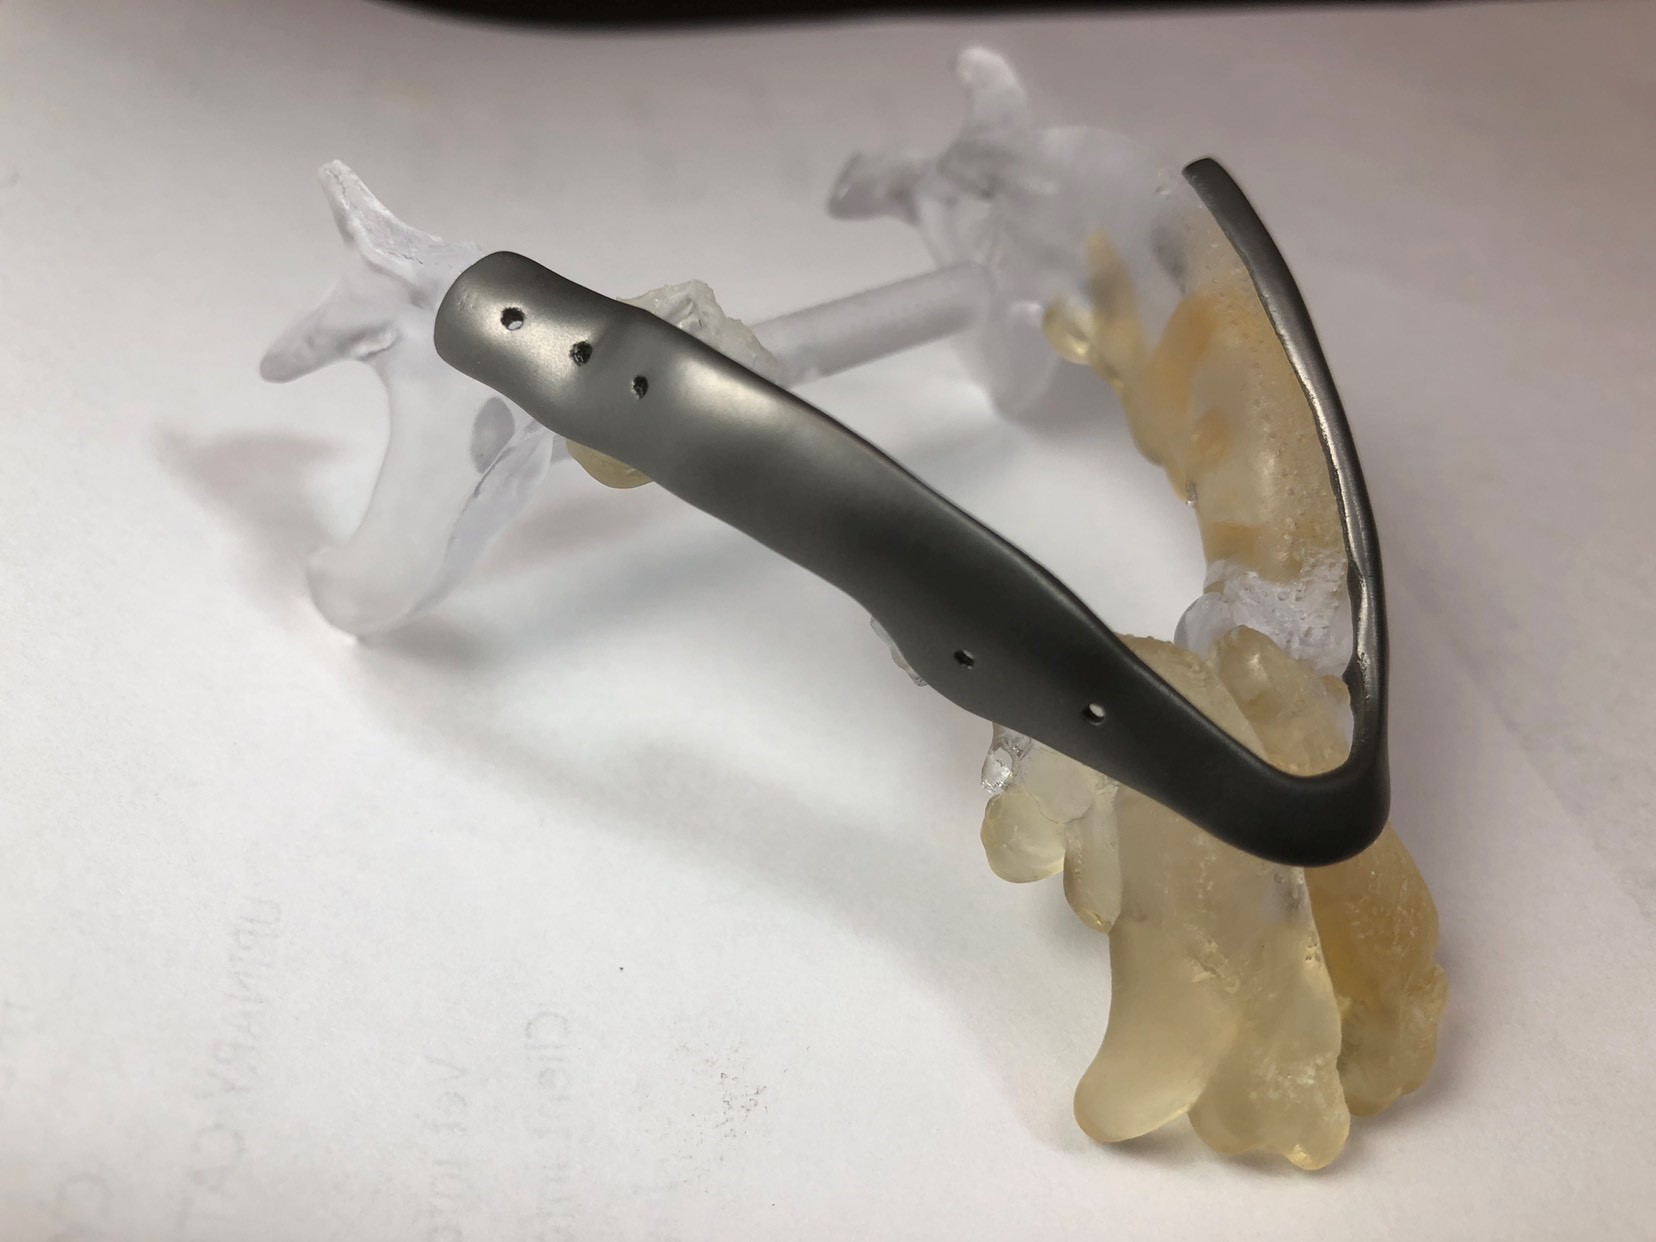 Partial 3D Jaw Replacement Procedure Carried Out on Companion Dog